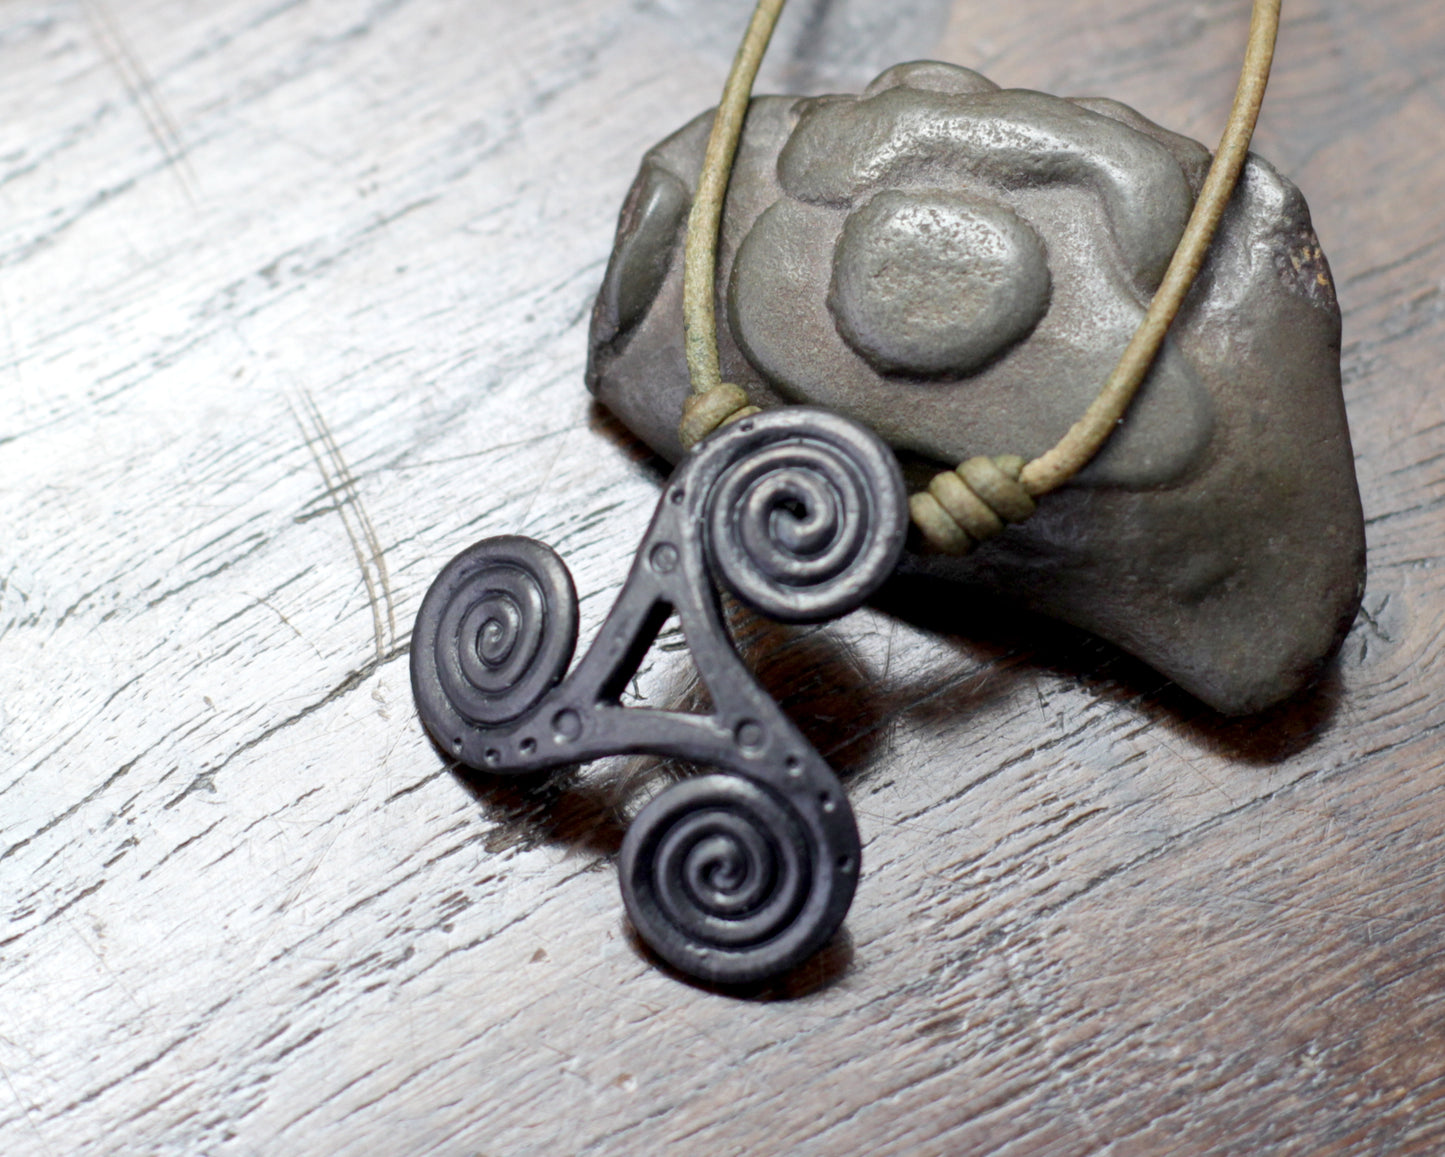 Hand Forged Iron Triskelion Necklace, designed and made by Blacksmith Marleena Barran from Taitaya Forge